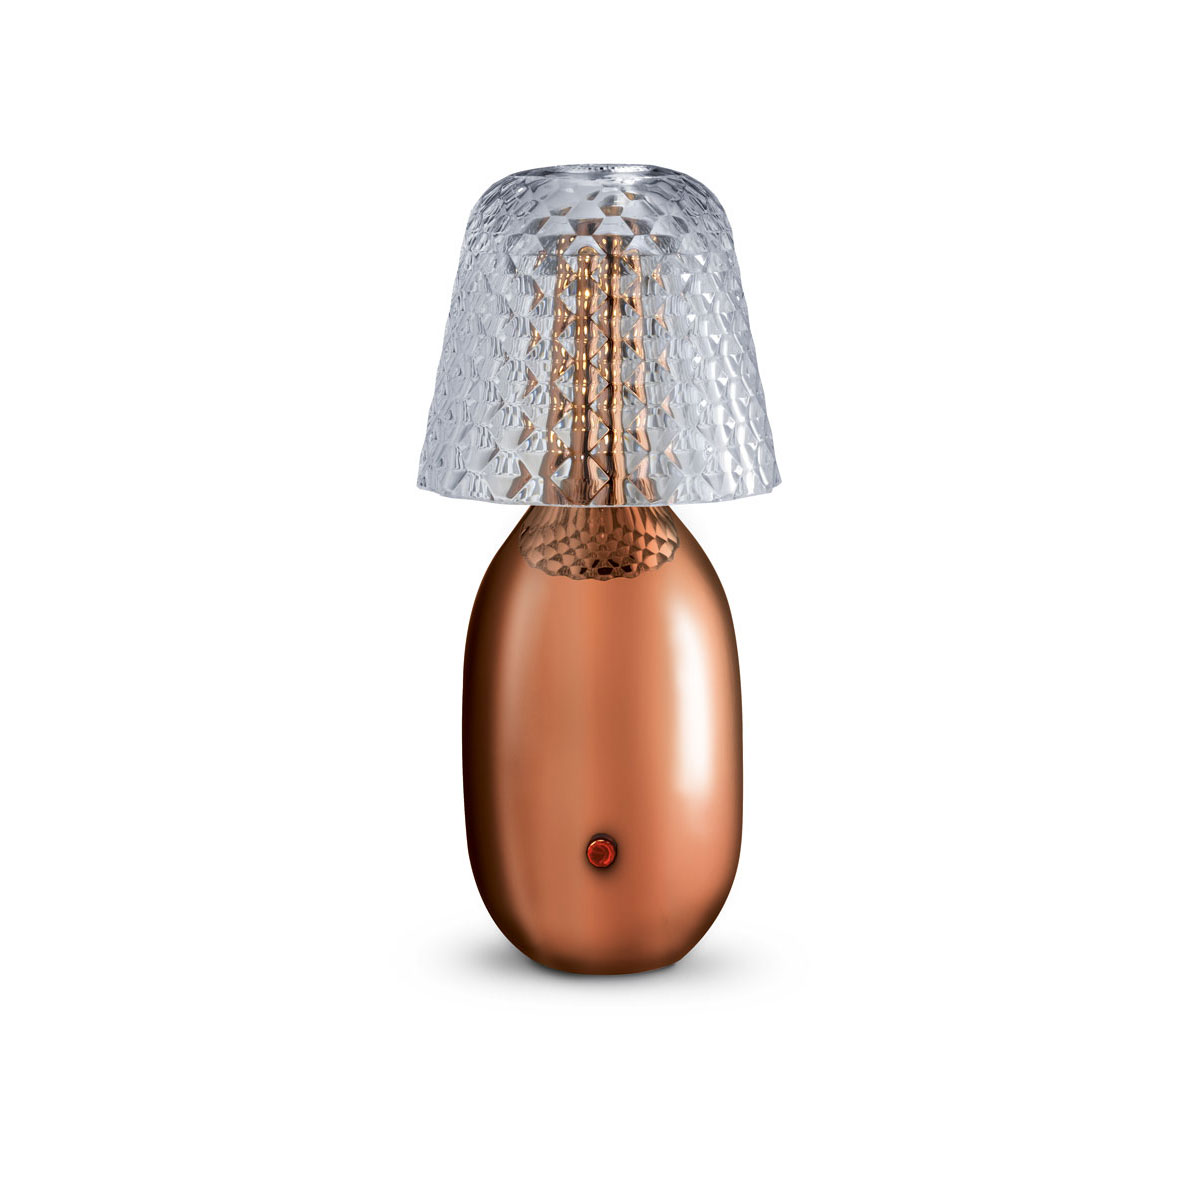 Baccarat Crystal Candy Light Lamp, Copper